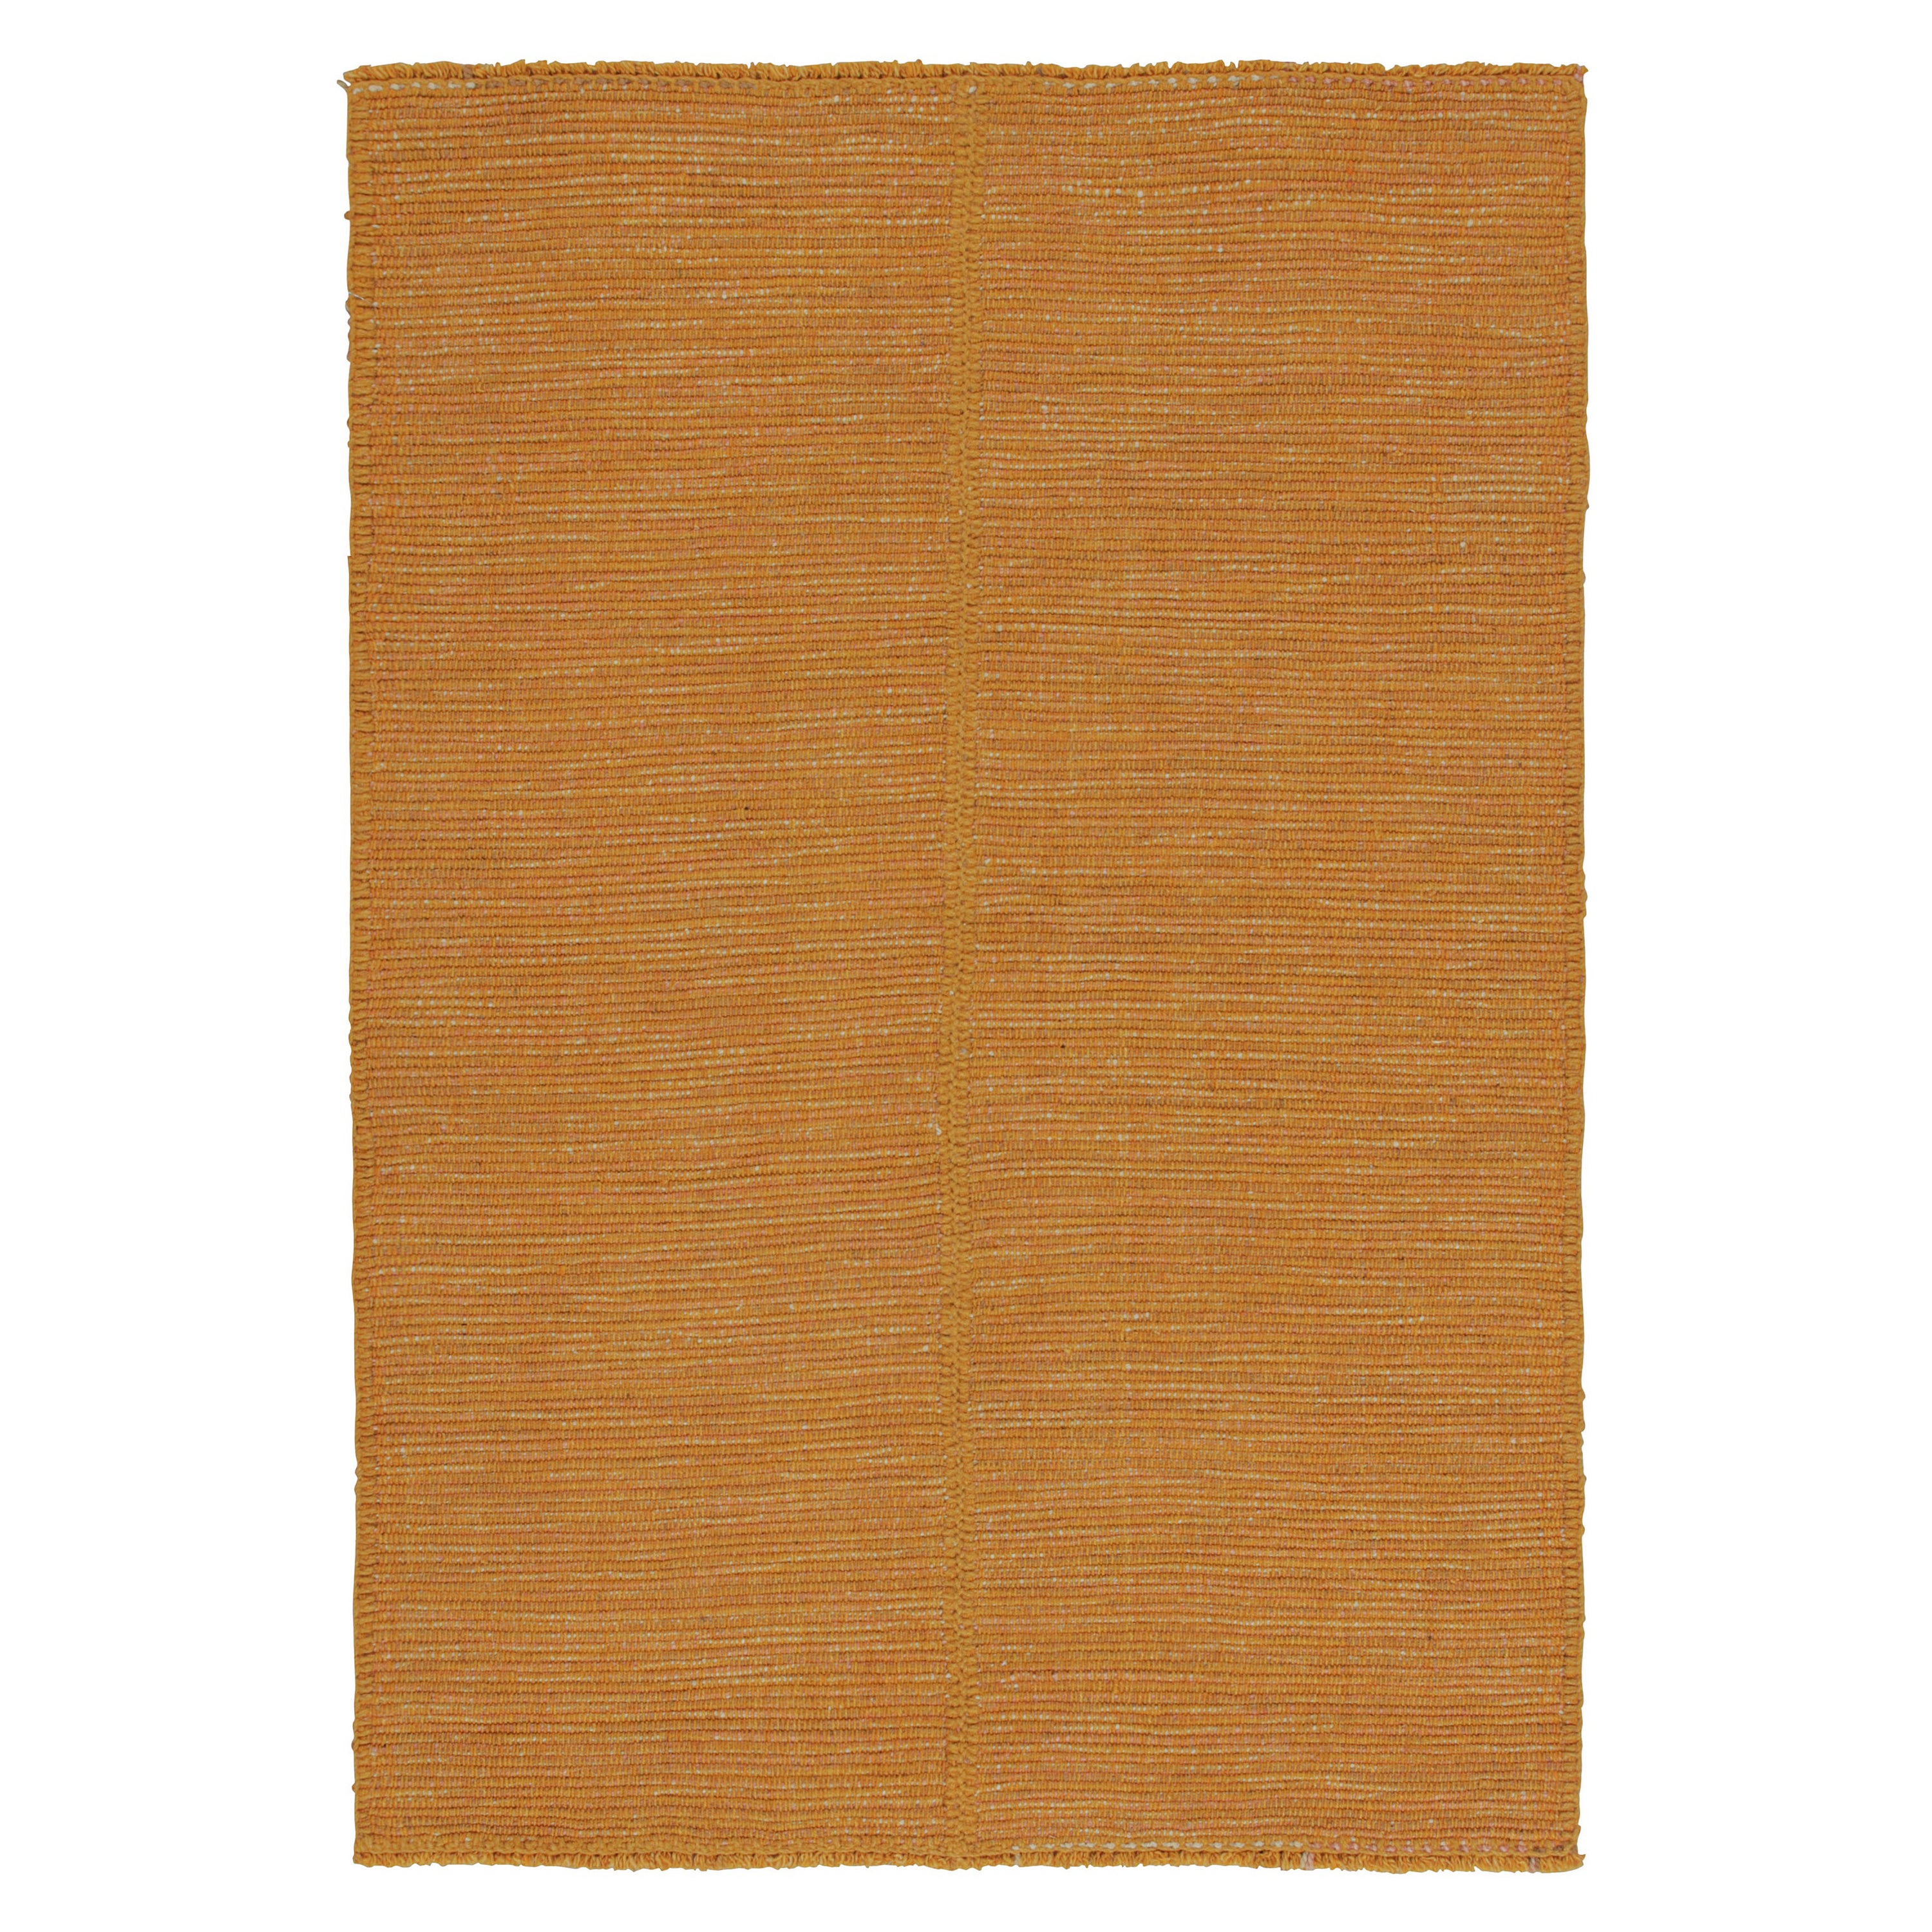 Rug & Kilim’s Contemporary Kilim Rug in Ochre with Beige and Pink Accents